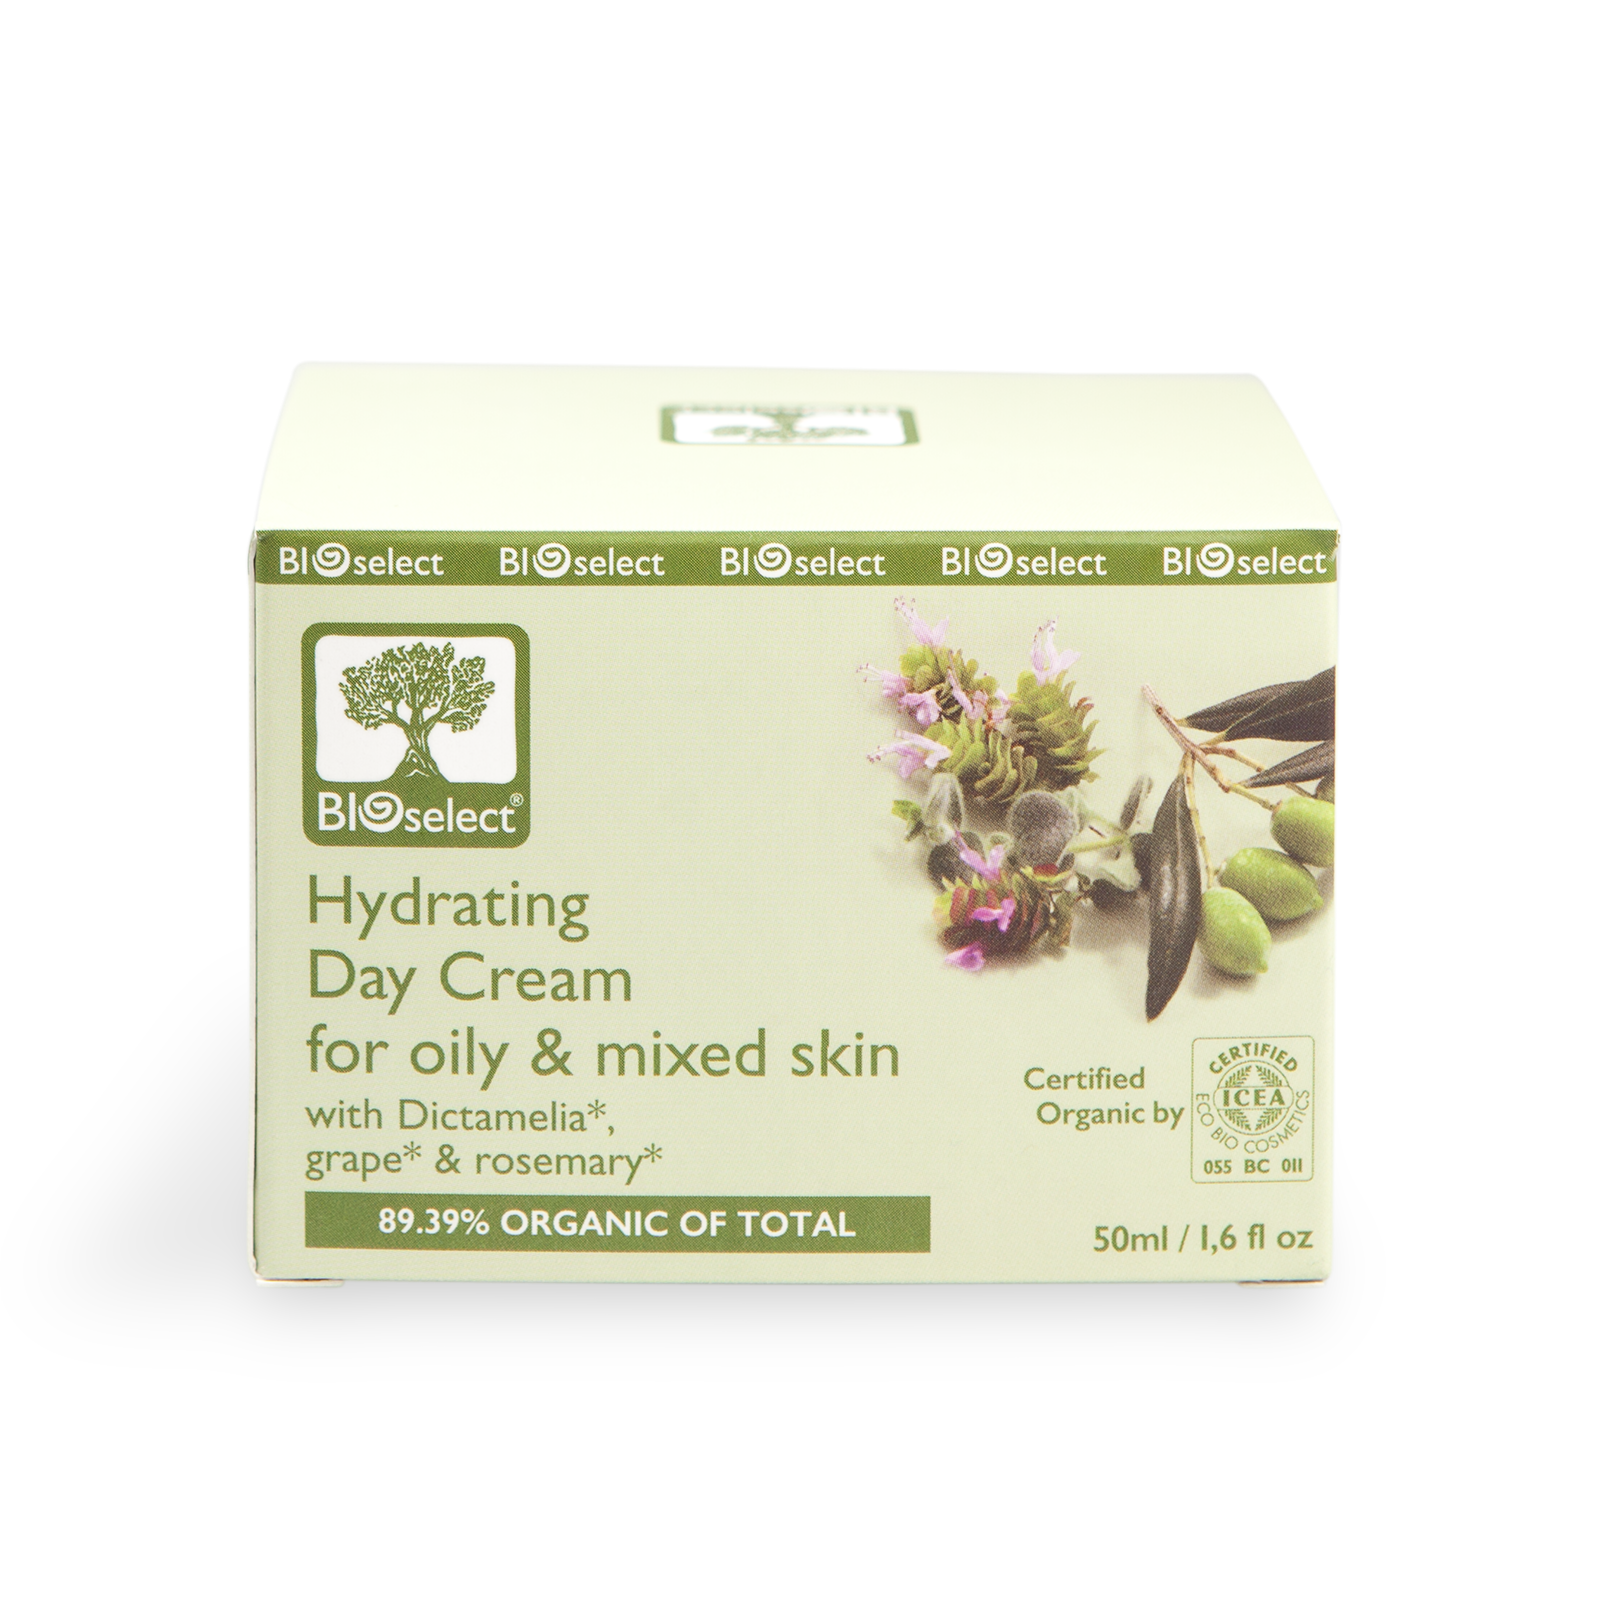 Bioselect Hydrating Day Cream for oily & mixed skin